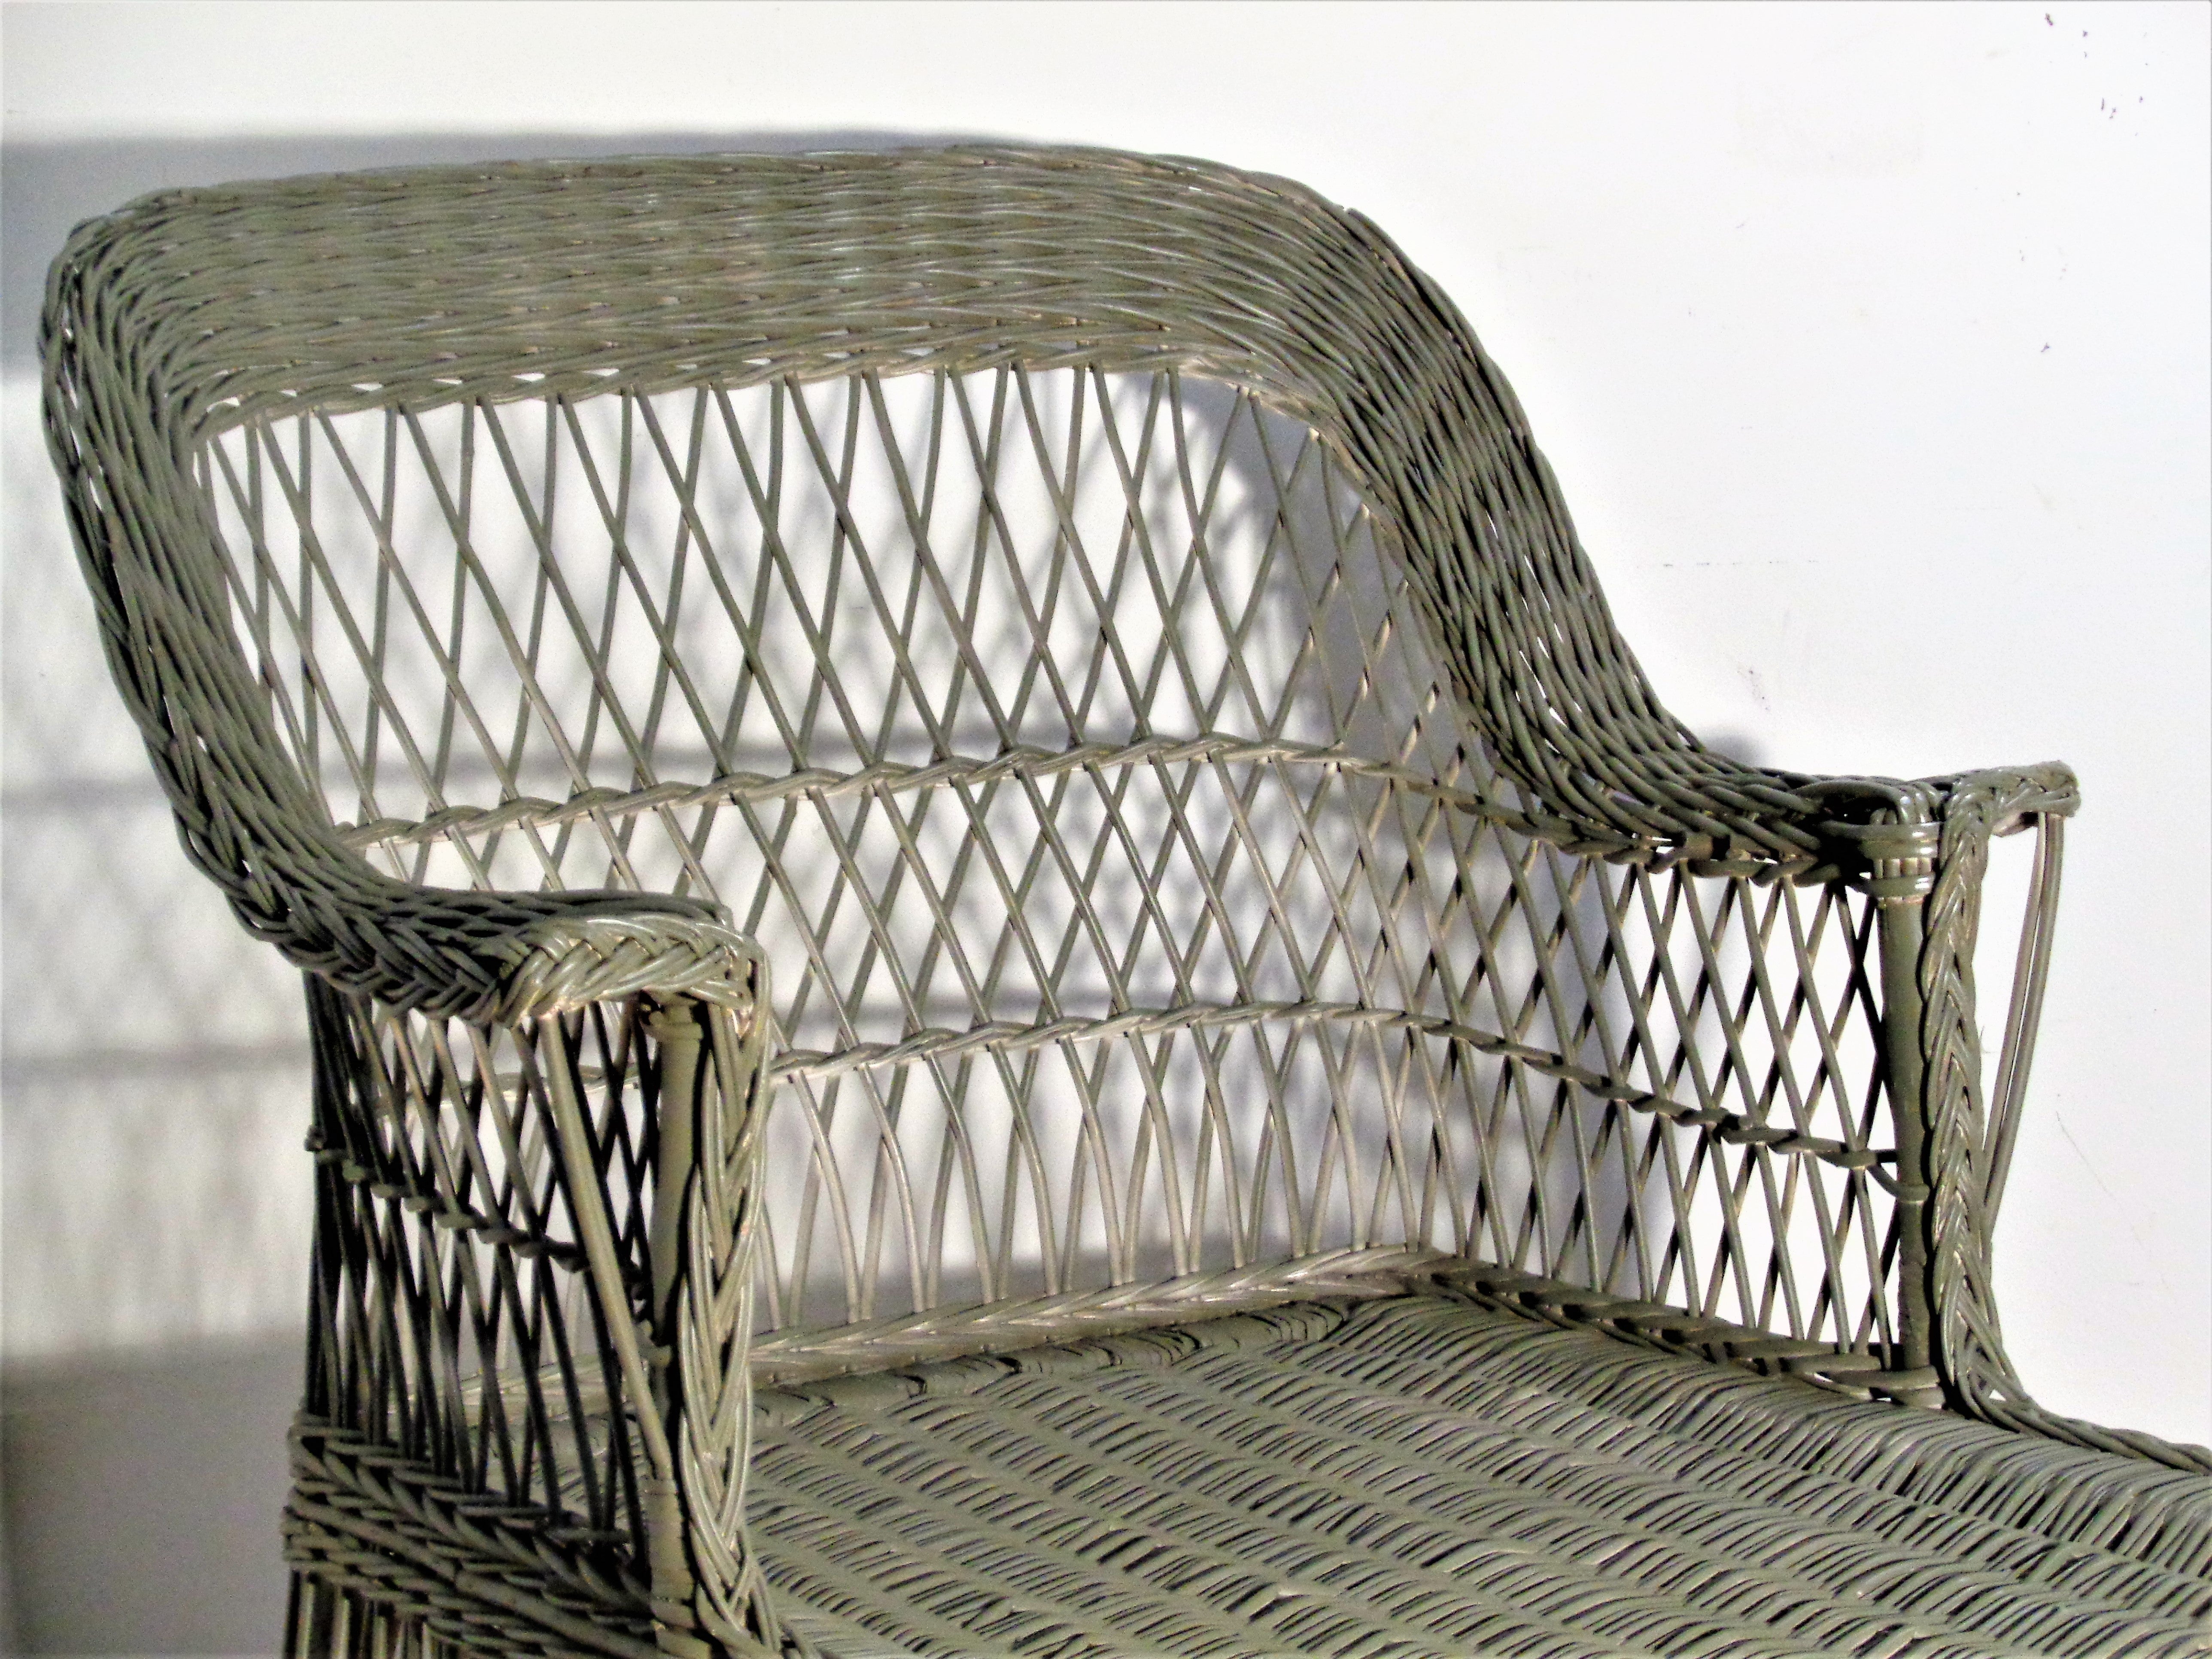 American Antique Bar Harbor Wicker Willow Chaise Lounge